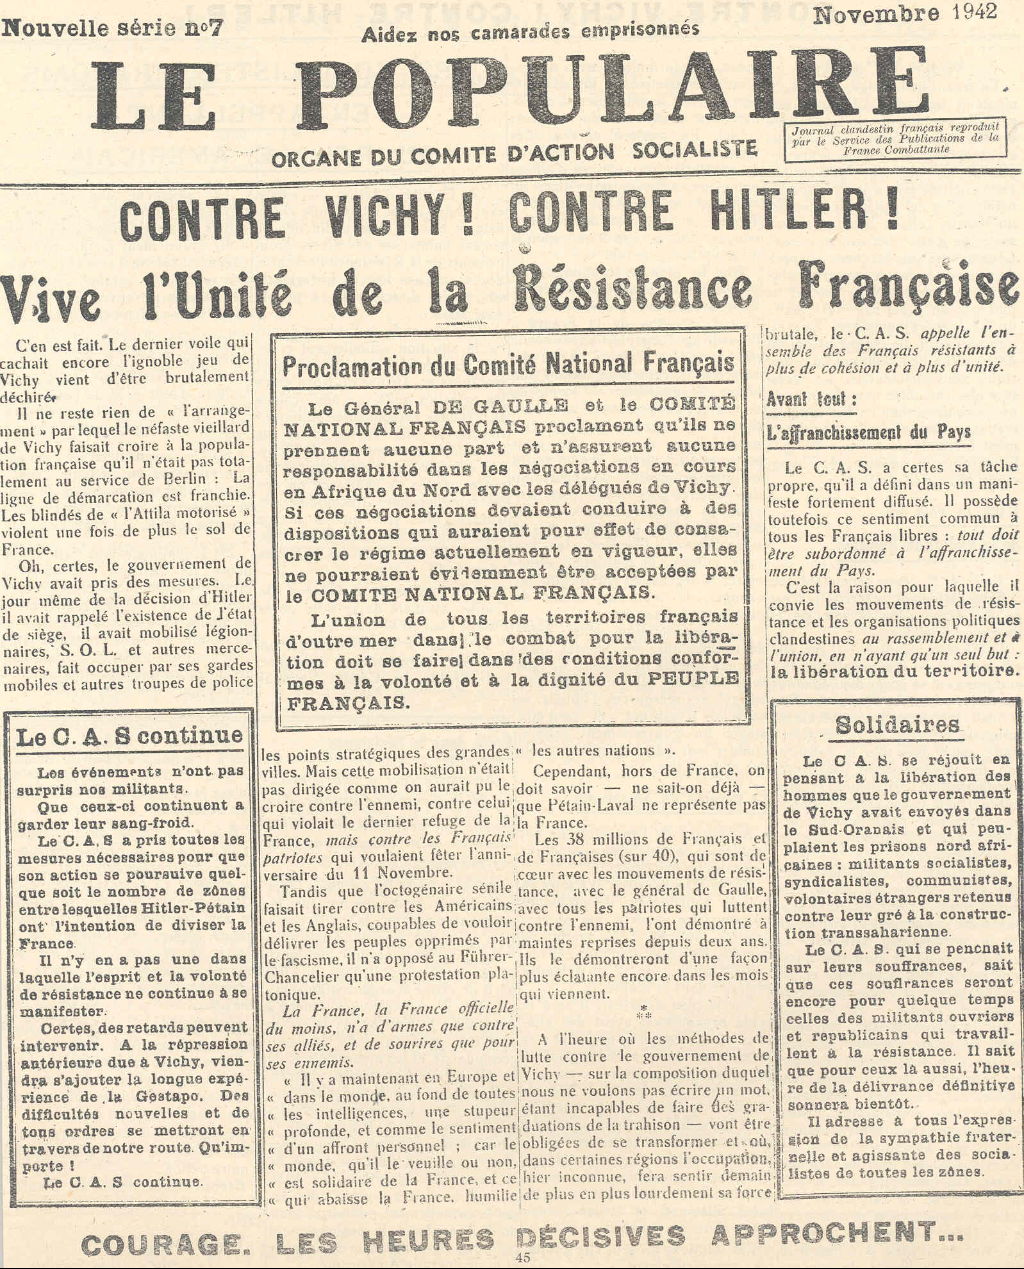 Edition of 'Le Populaire', a socialist French resistance news sheet, November 1942